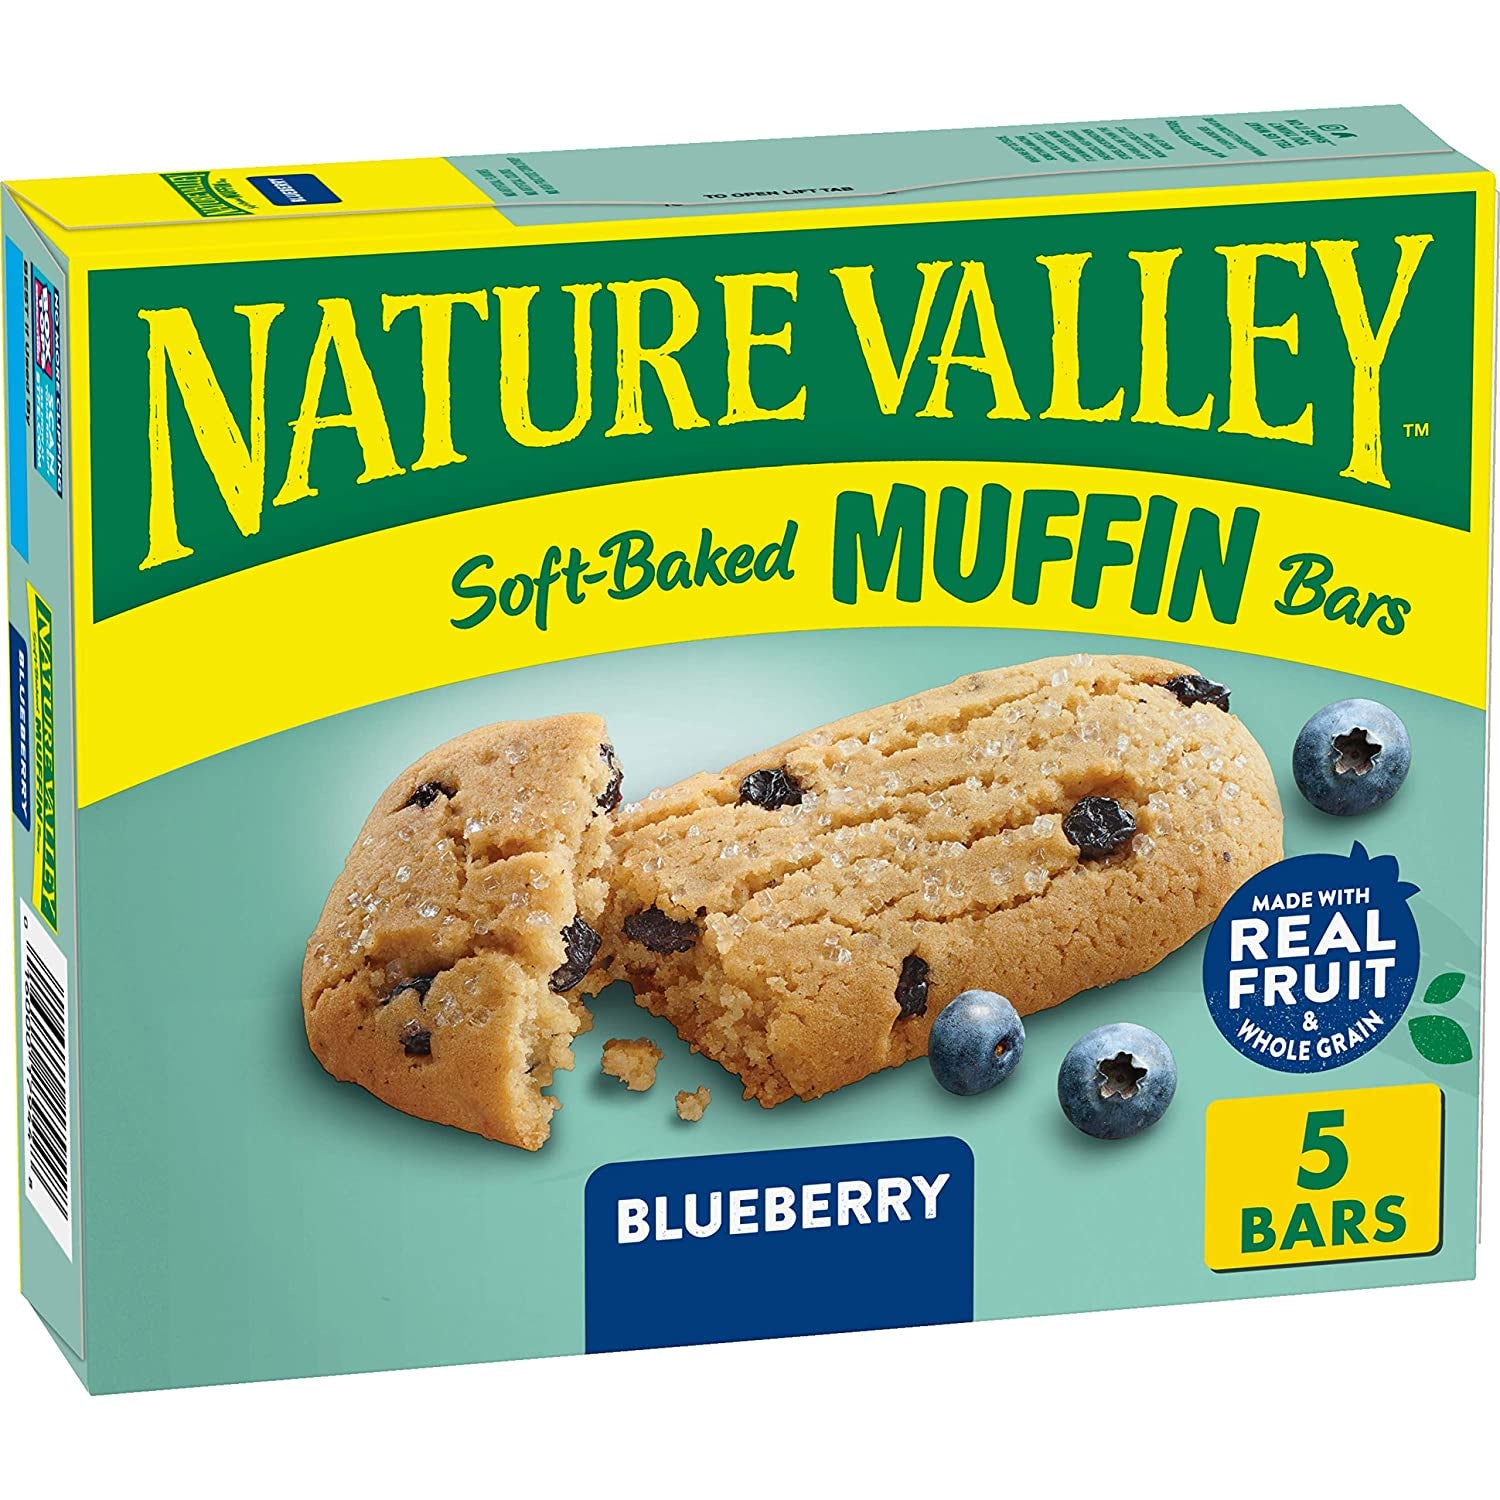 Nature Valley Blueberry Muffin Bar 5ct